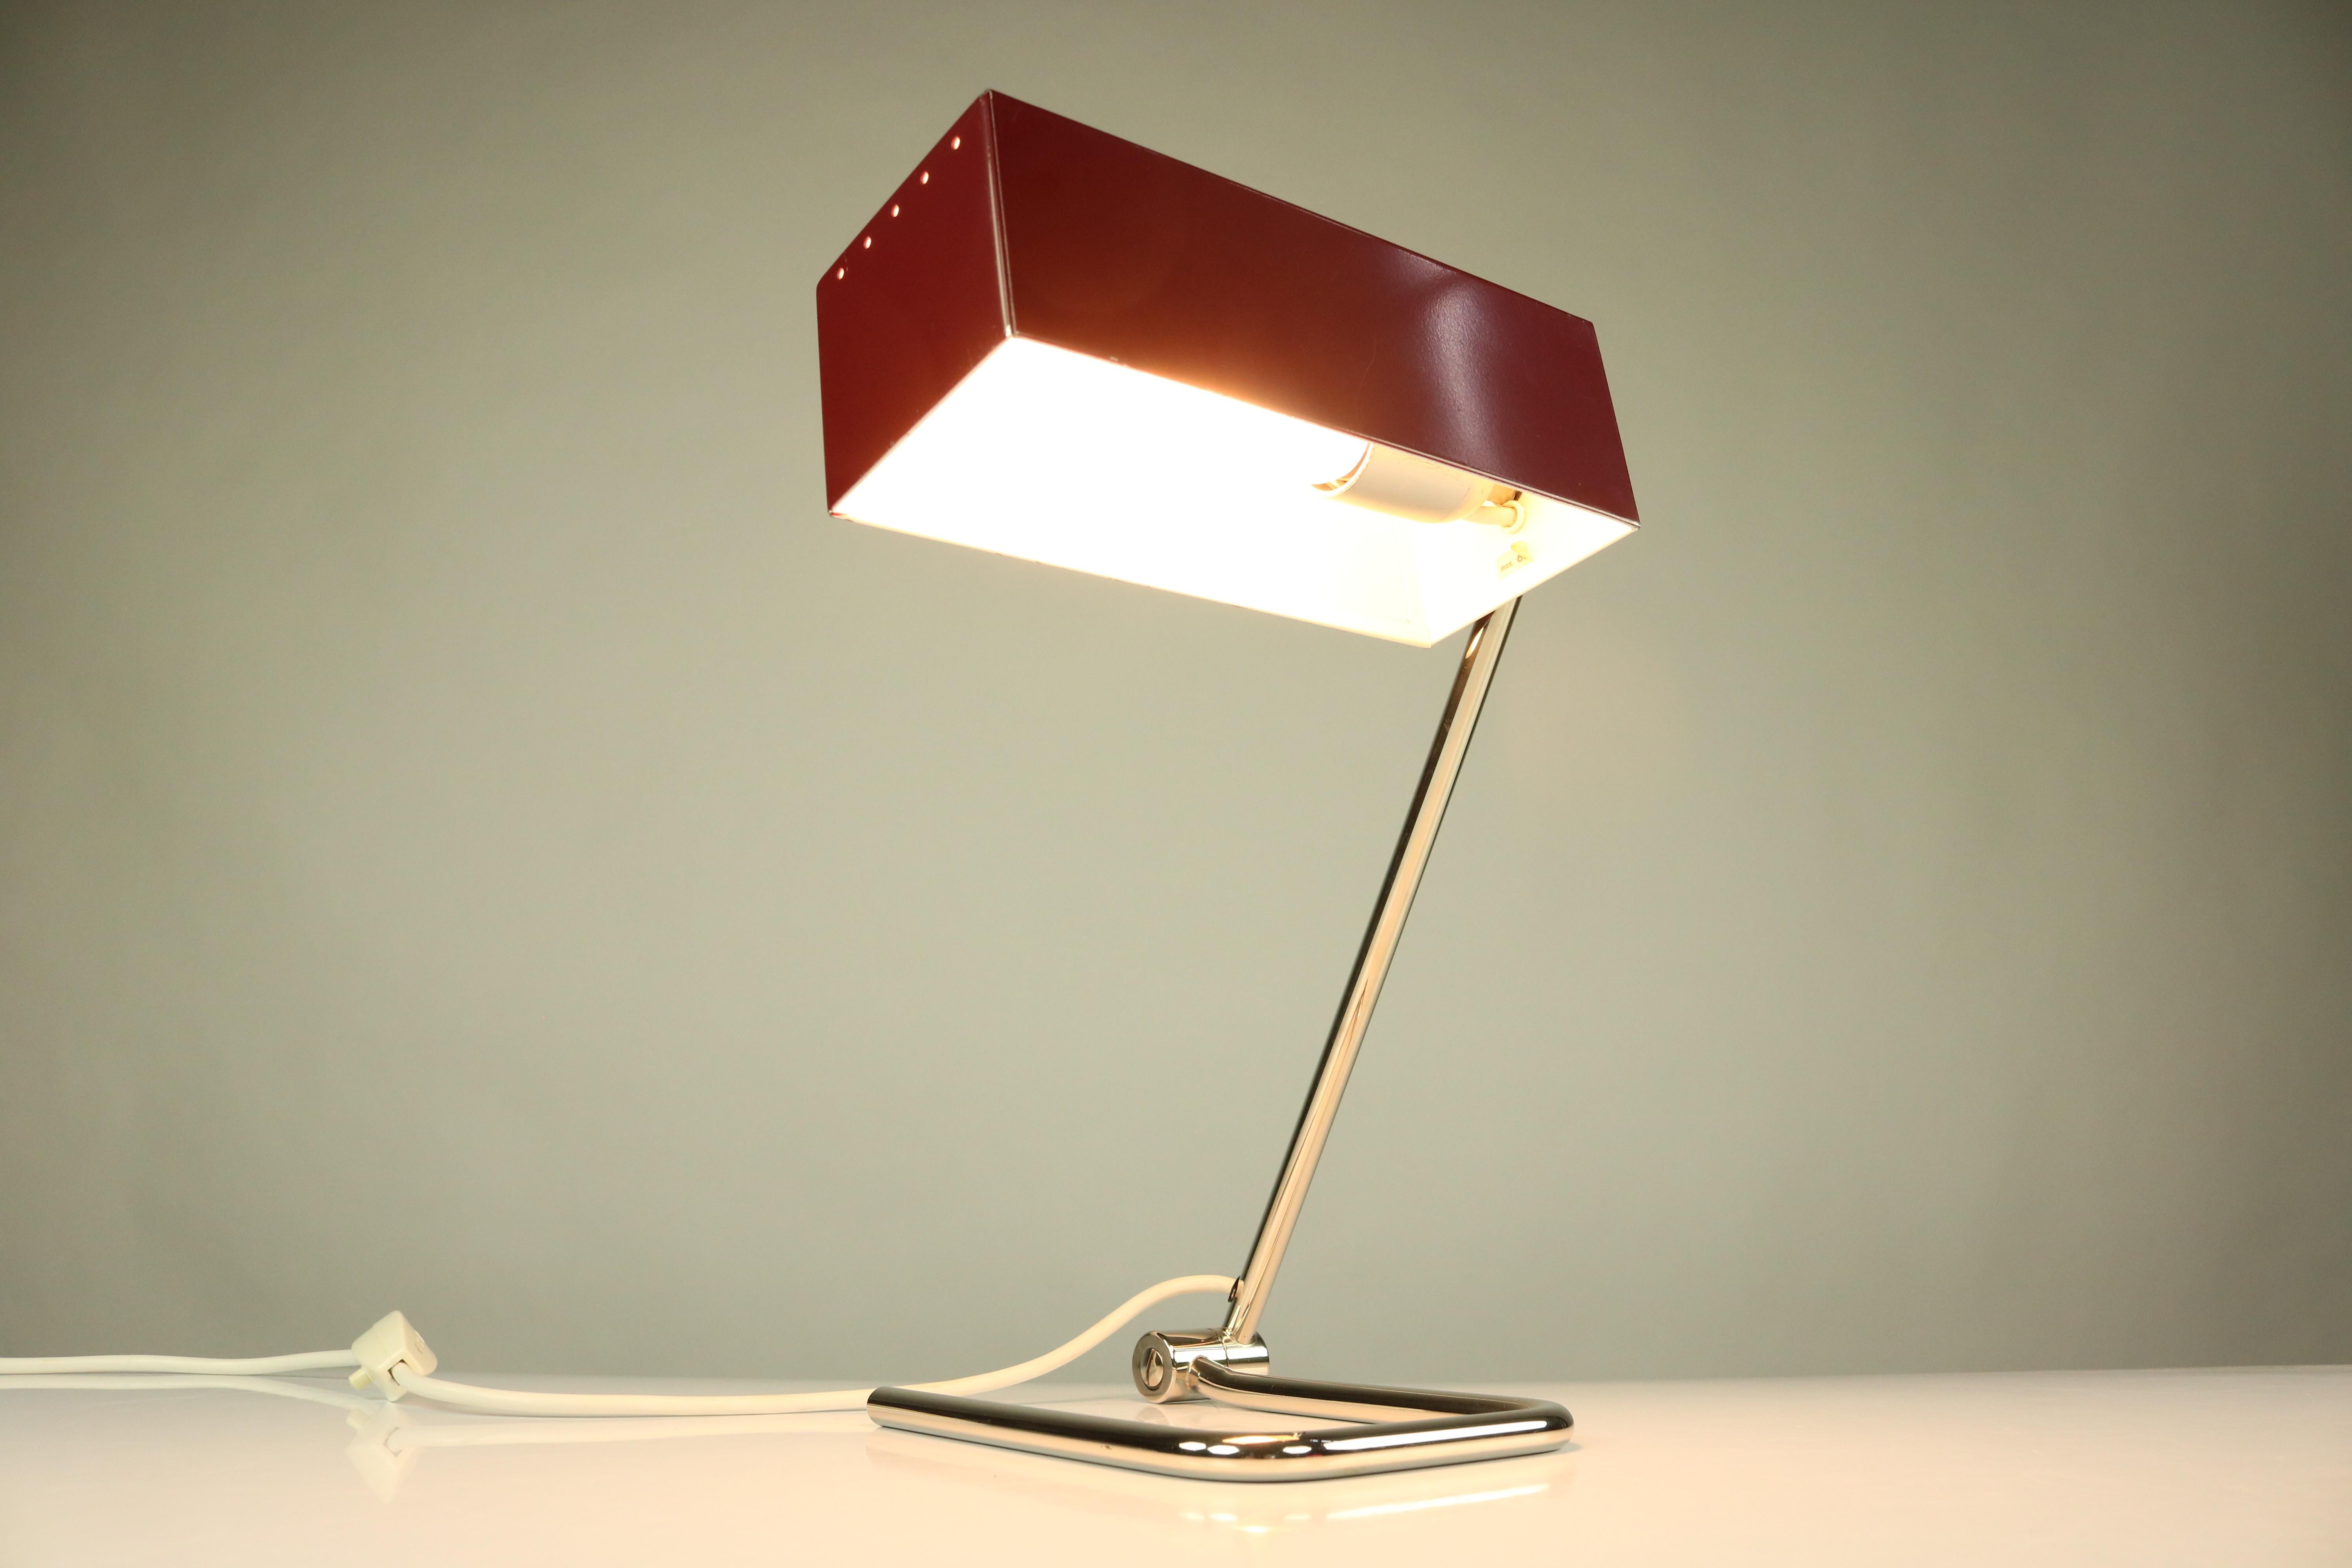 Cubistic design 1950s table lamp by Hala Germany
Made of chromed brass and a red lacquered aluminum shade moveable mounted
Socket E27 - medium Edison screw
Measures: 
shade width 22 cm - 8 3/4